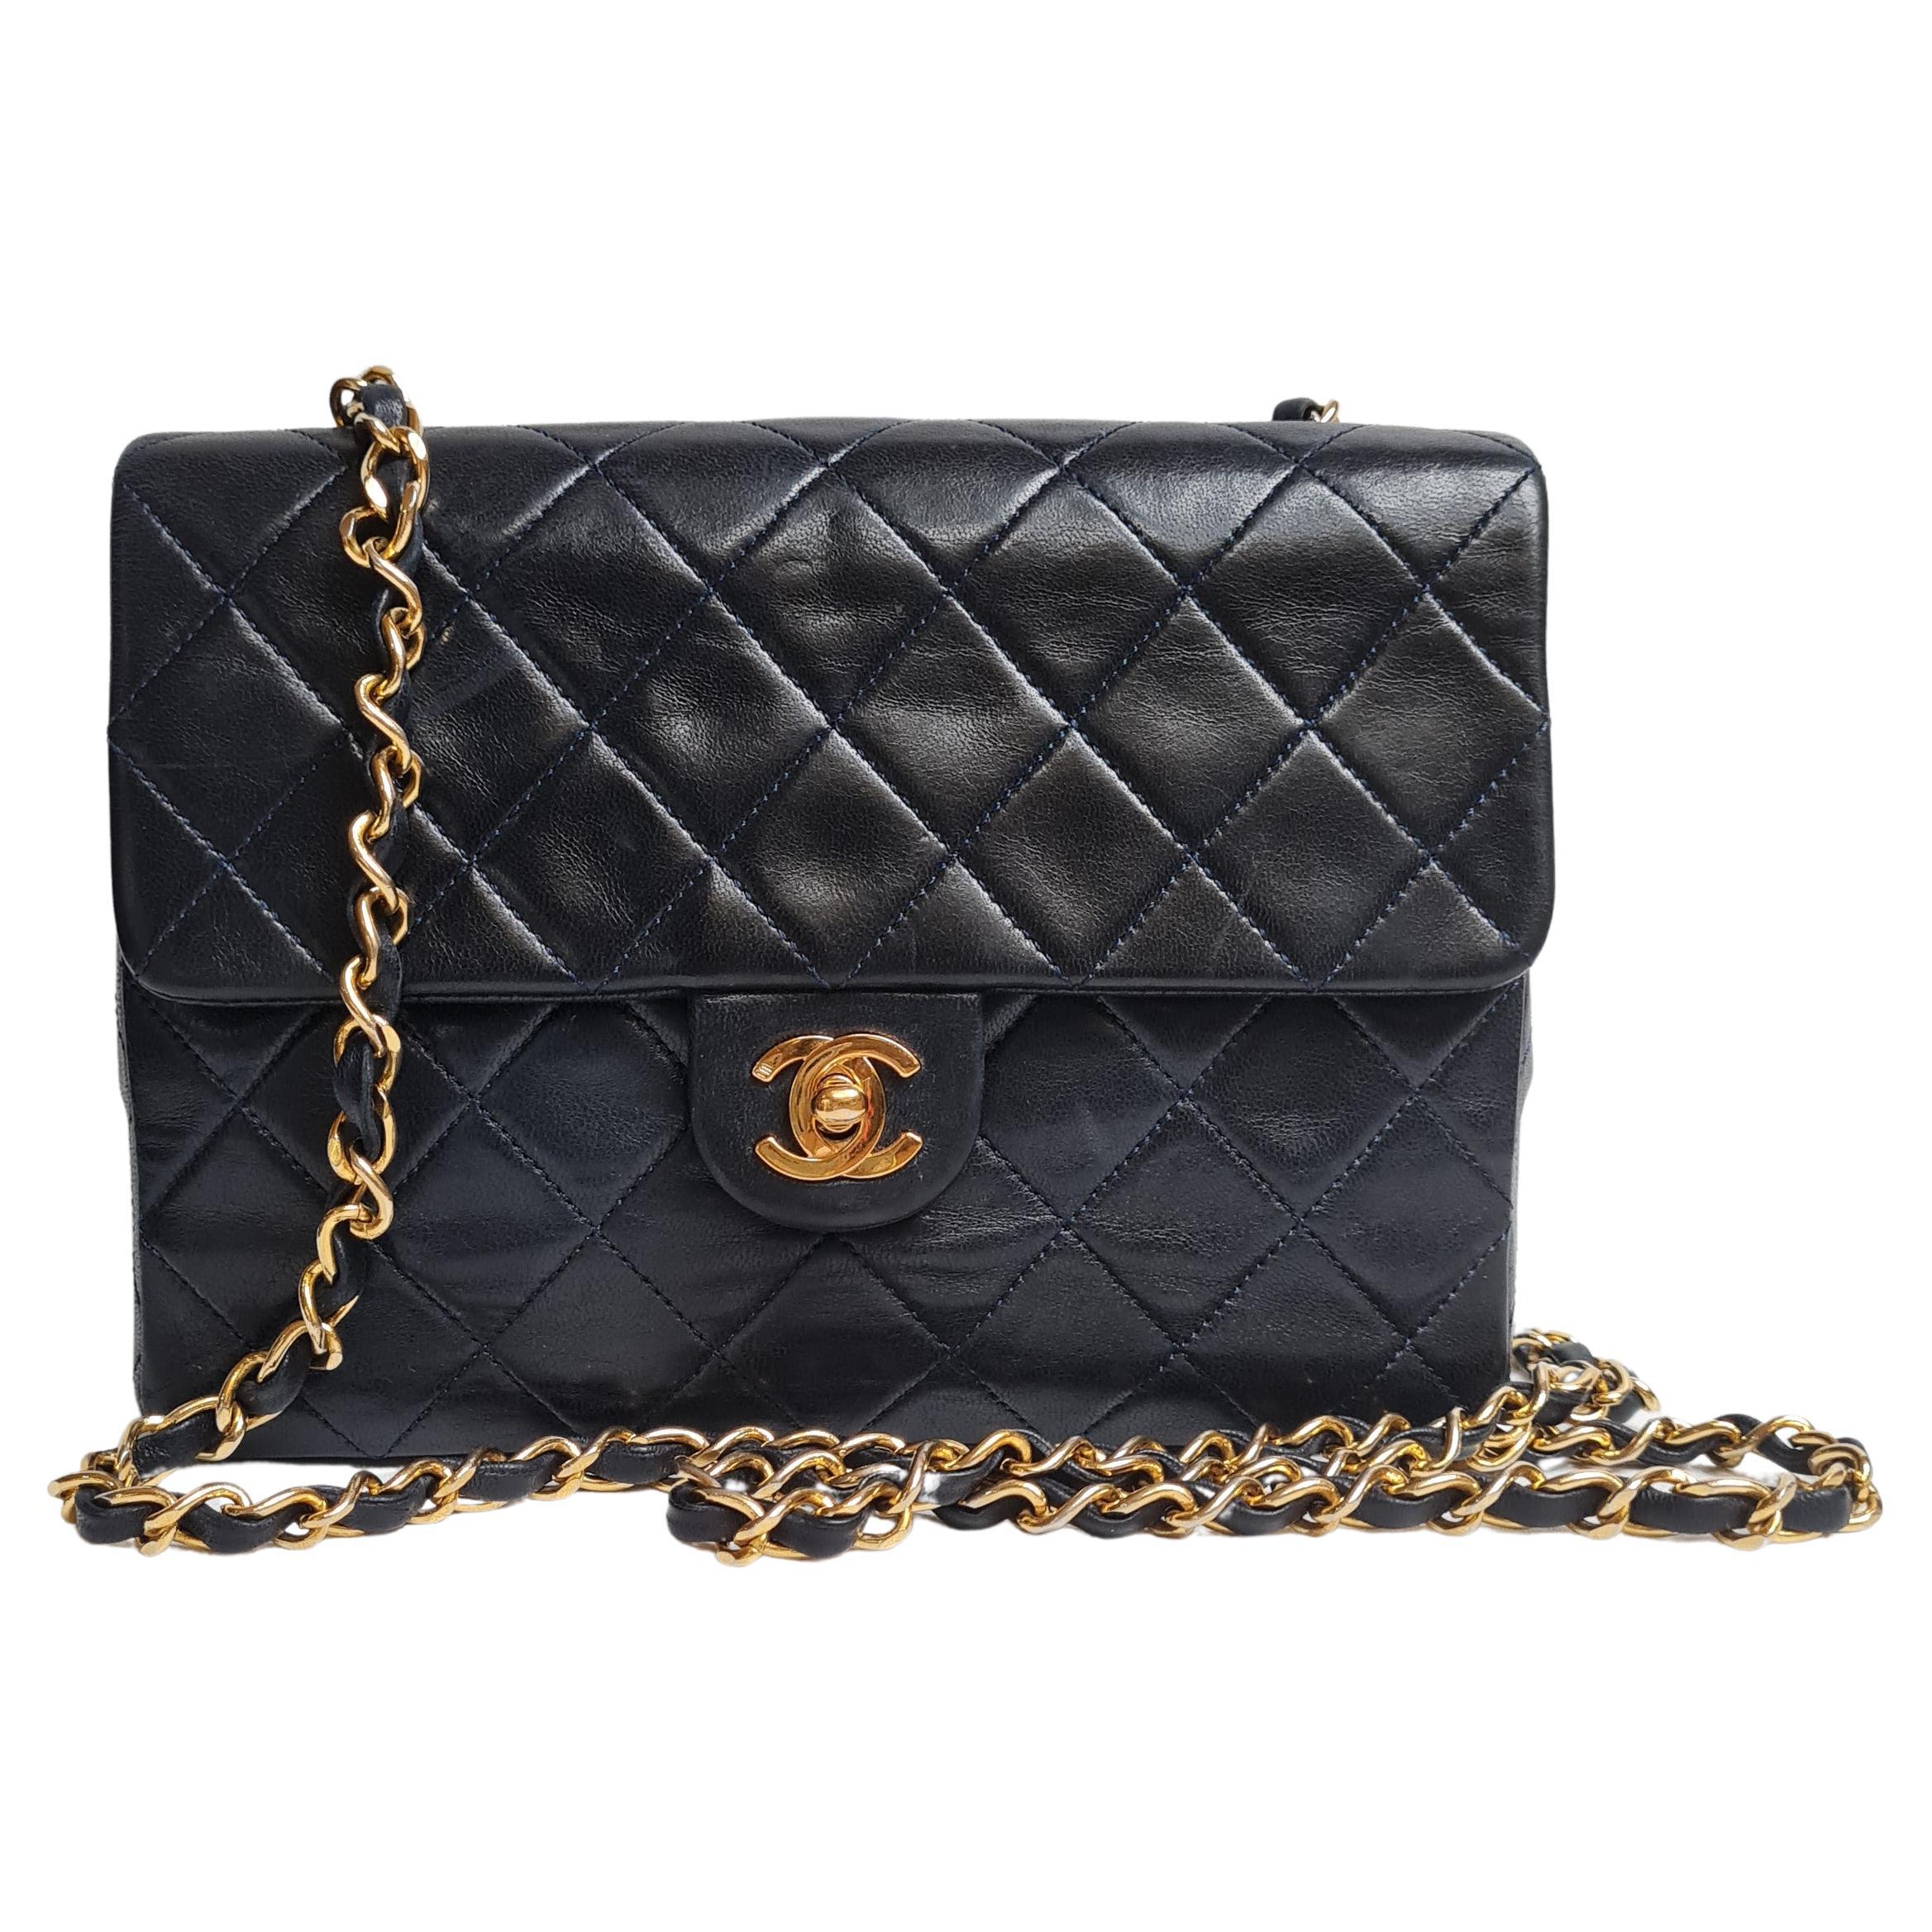 Chanel White Quilted Goatskin Vertical Chic Pearls Flap Bag